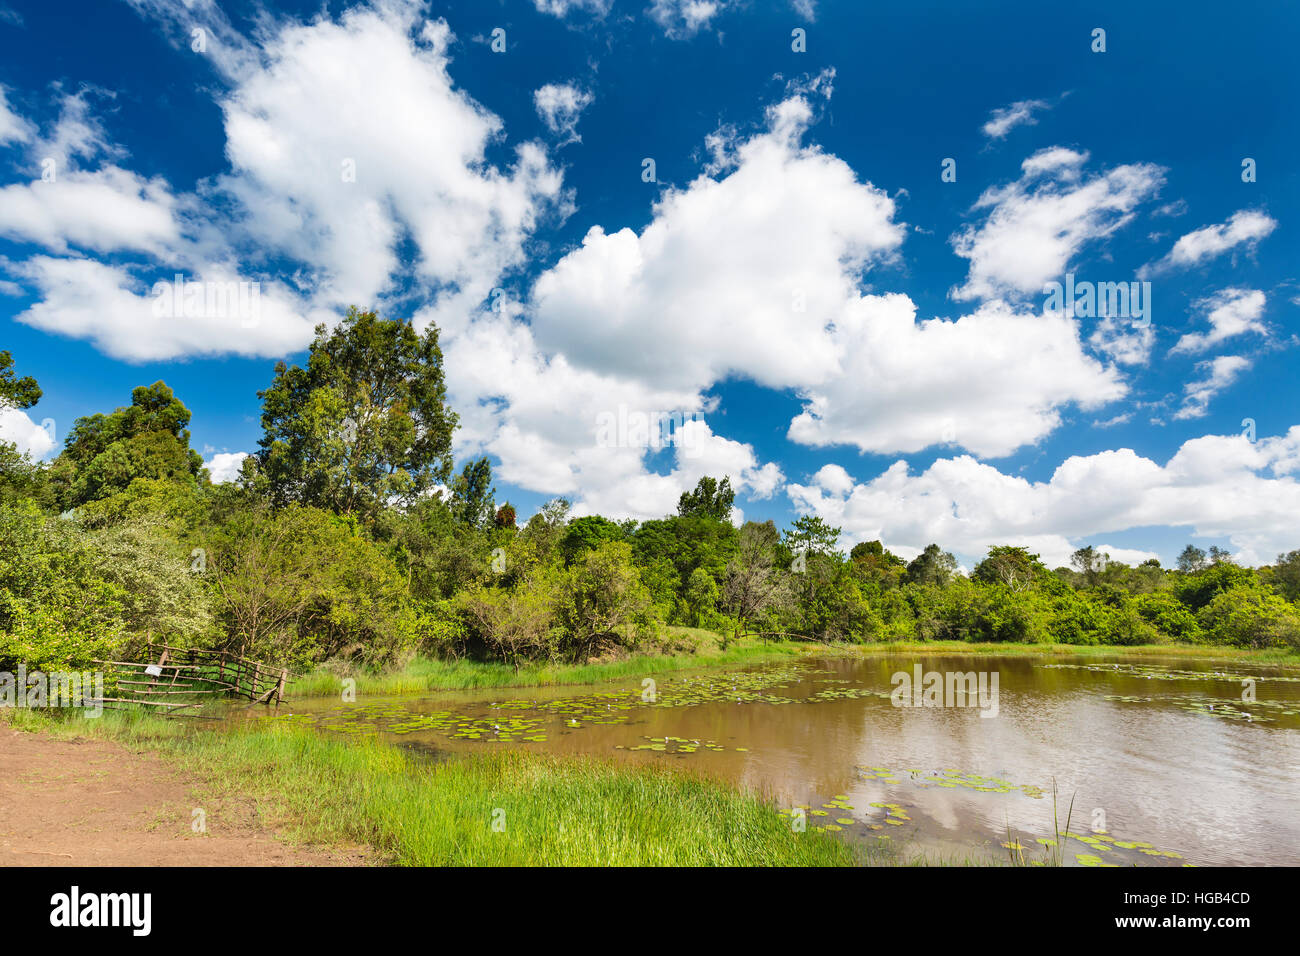 The beautiful Lily Lake in Karura Forest, Nairobi, Kenya with deep blue sky and some clouds. Stock Photo